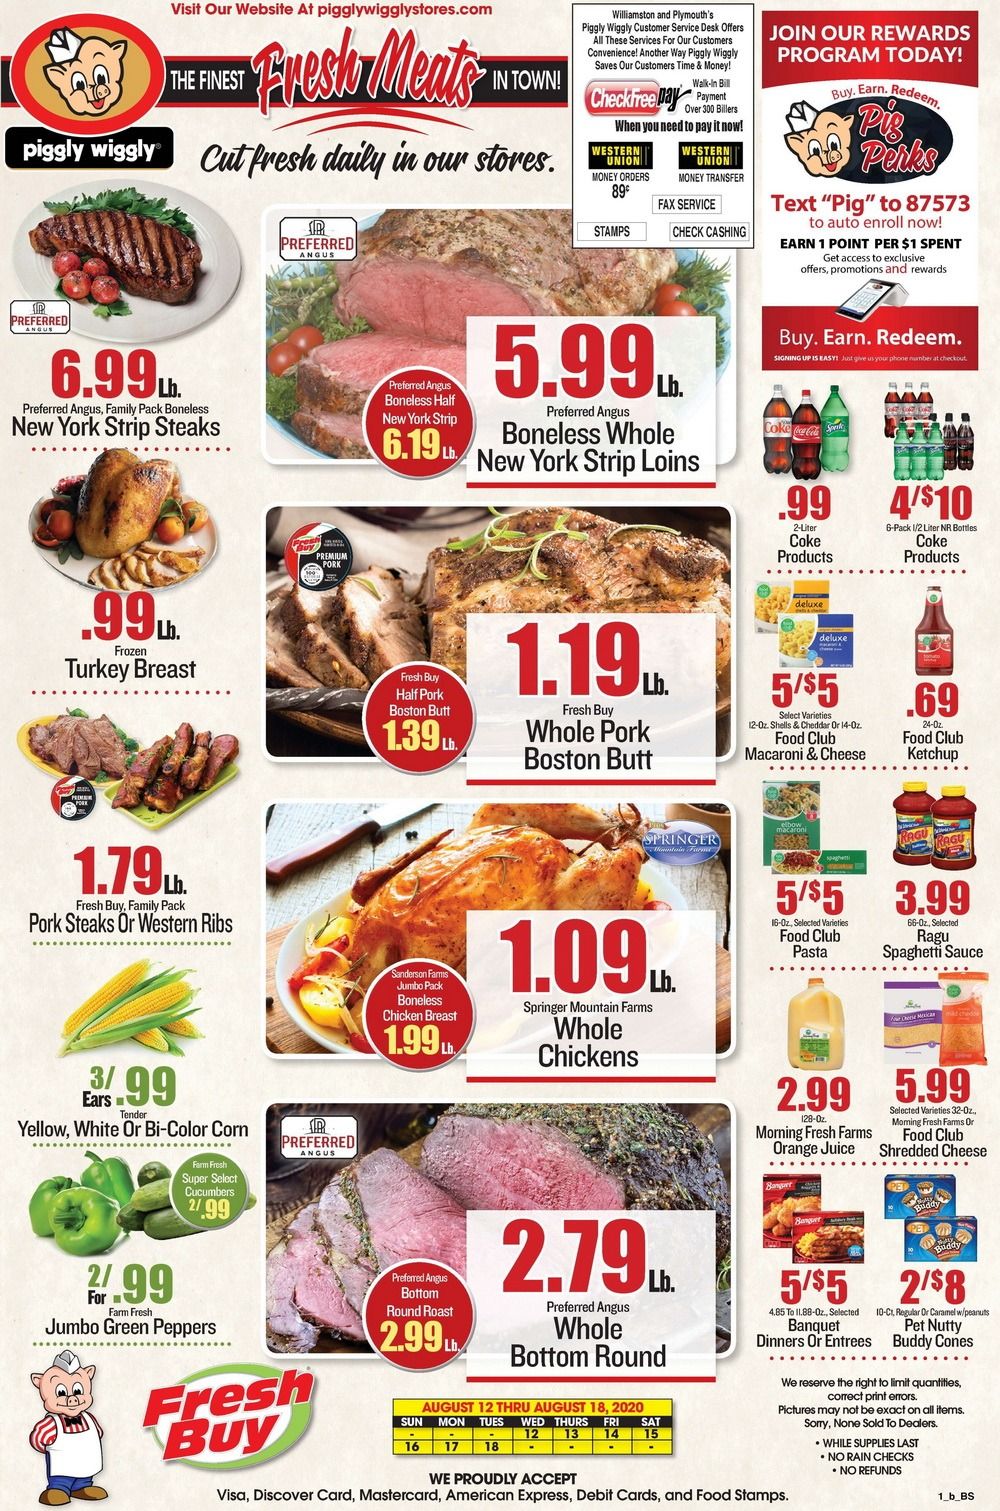 piggly wiggly coupons